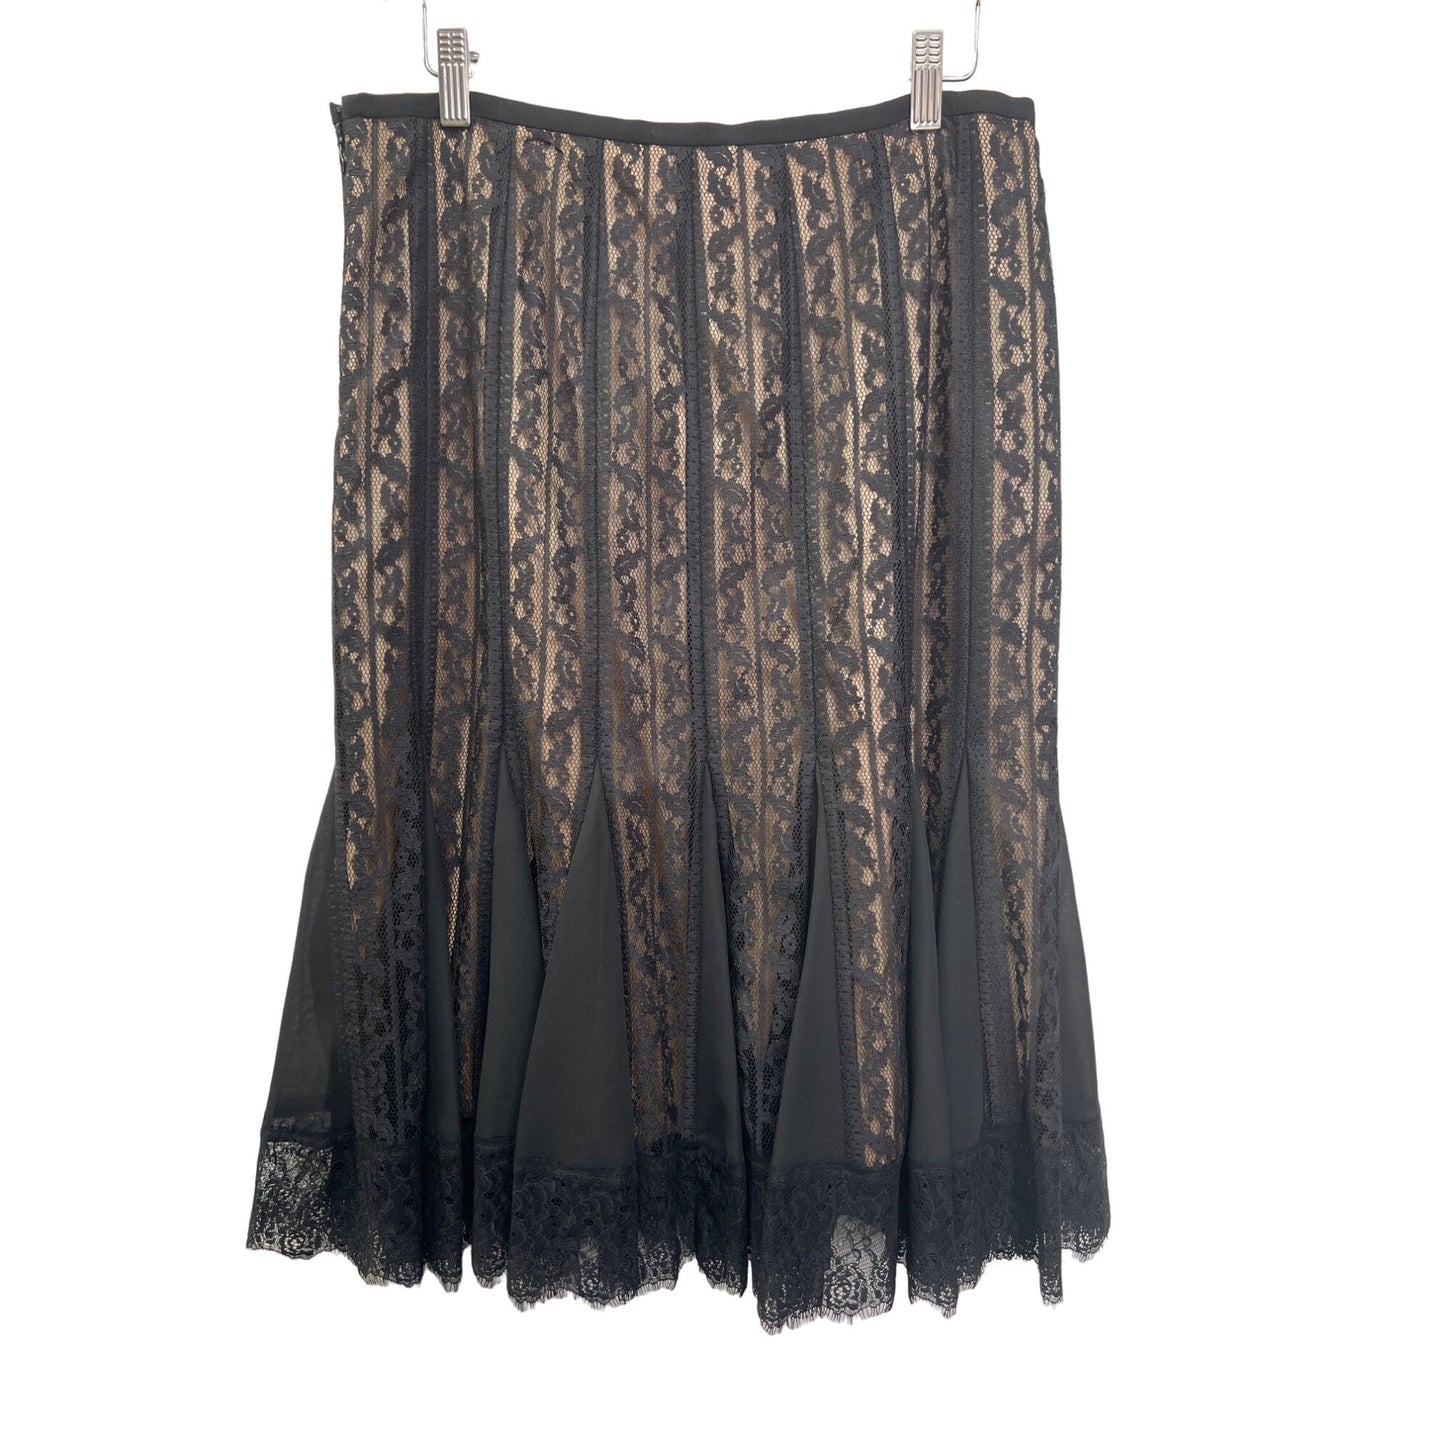 Loft Black Lace Overlay Fit and Flare Skirt